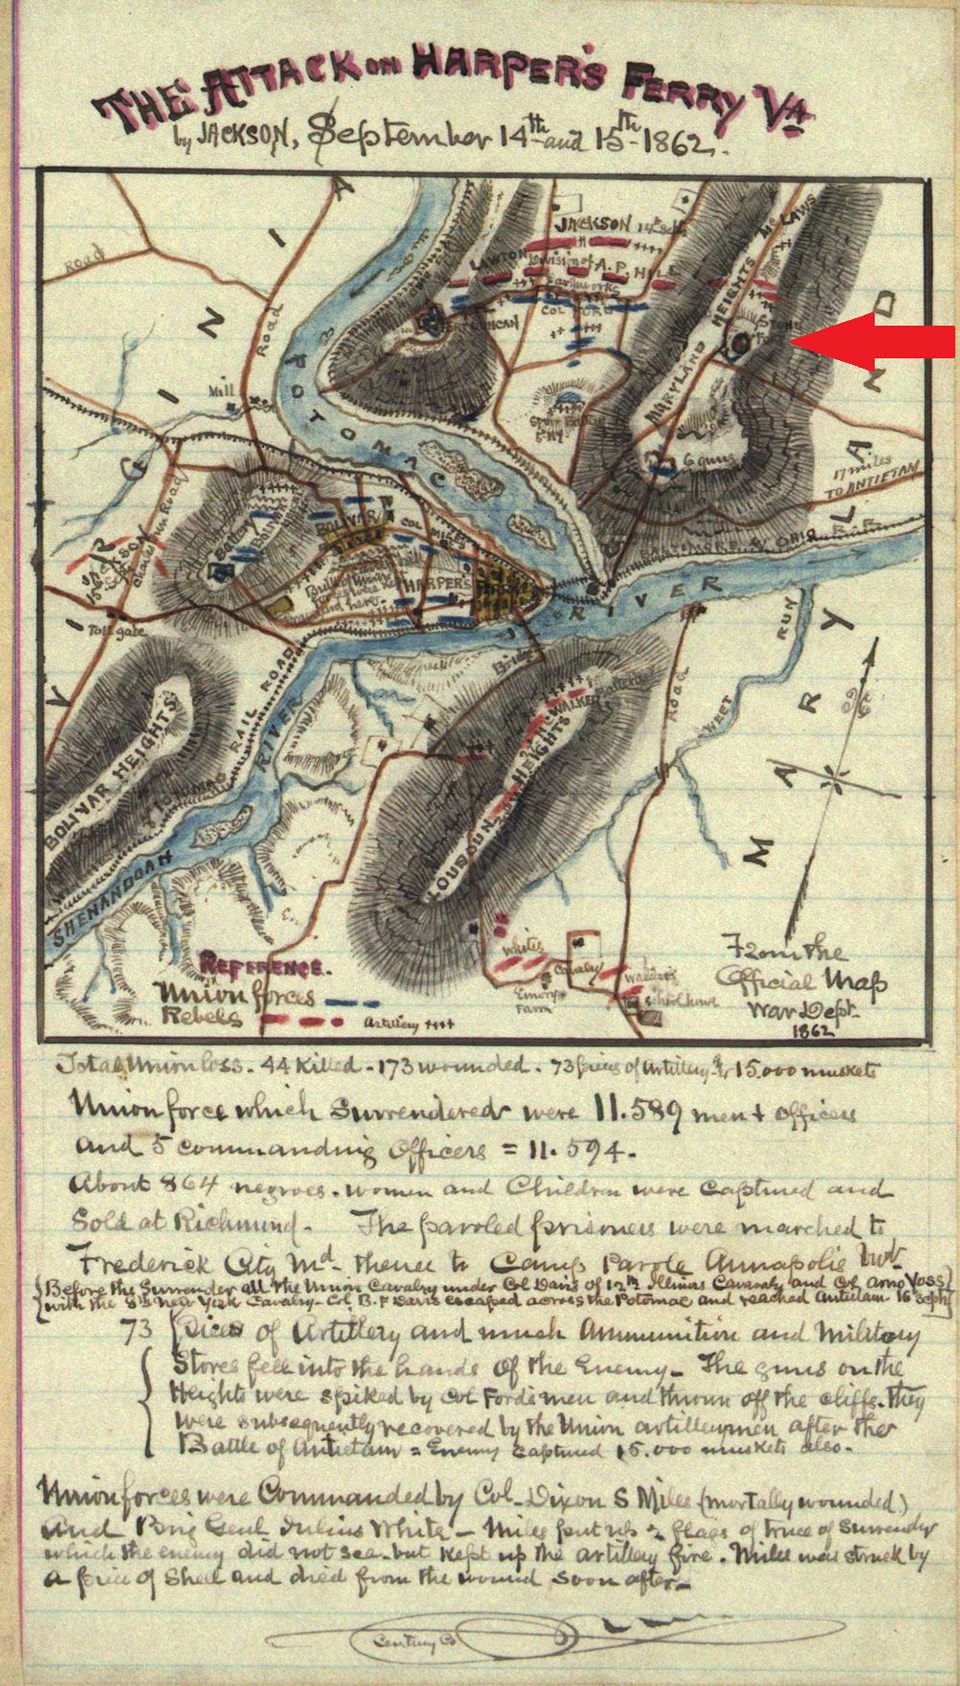 hand-drawn map from 1862 showing Harpers Ferry and the Potomac and Shenandoah rivers, with writing on the bottom detailing the Sept 1862 Civil War battle